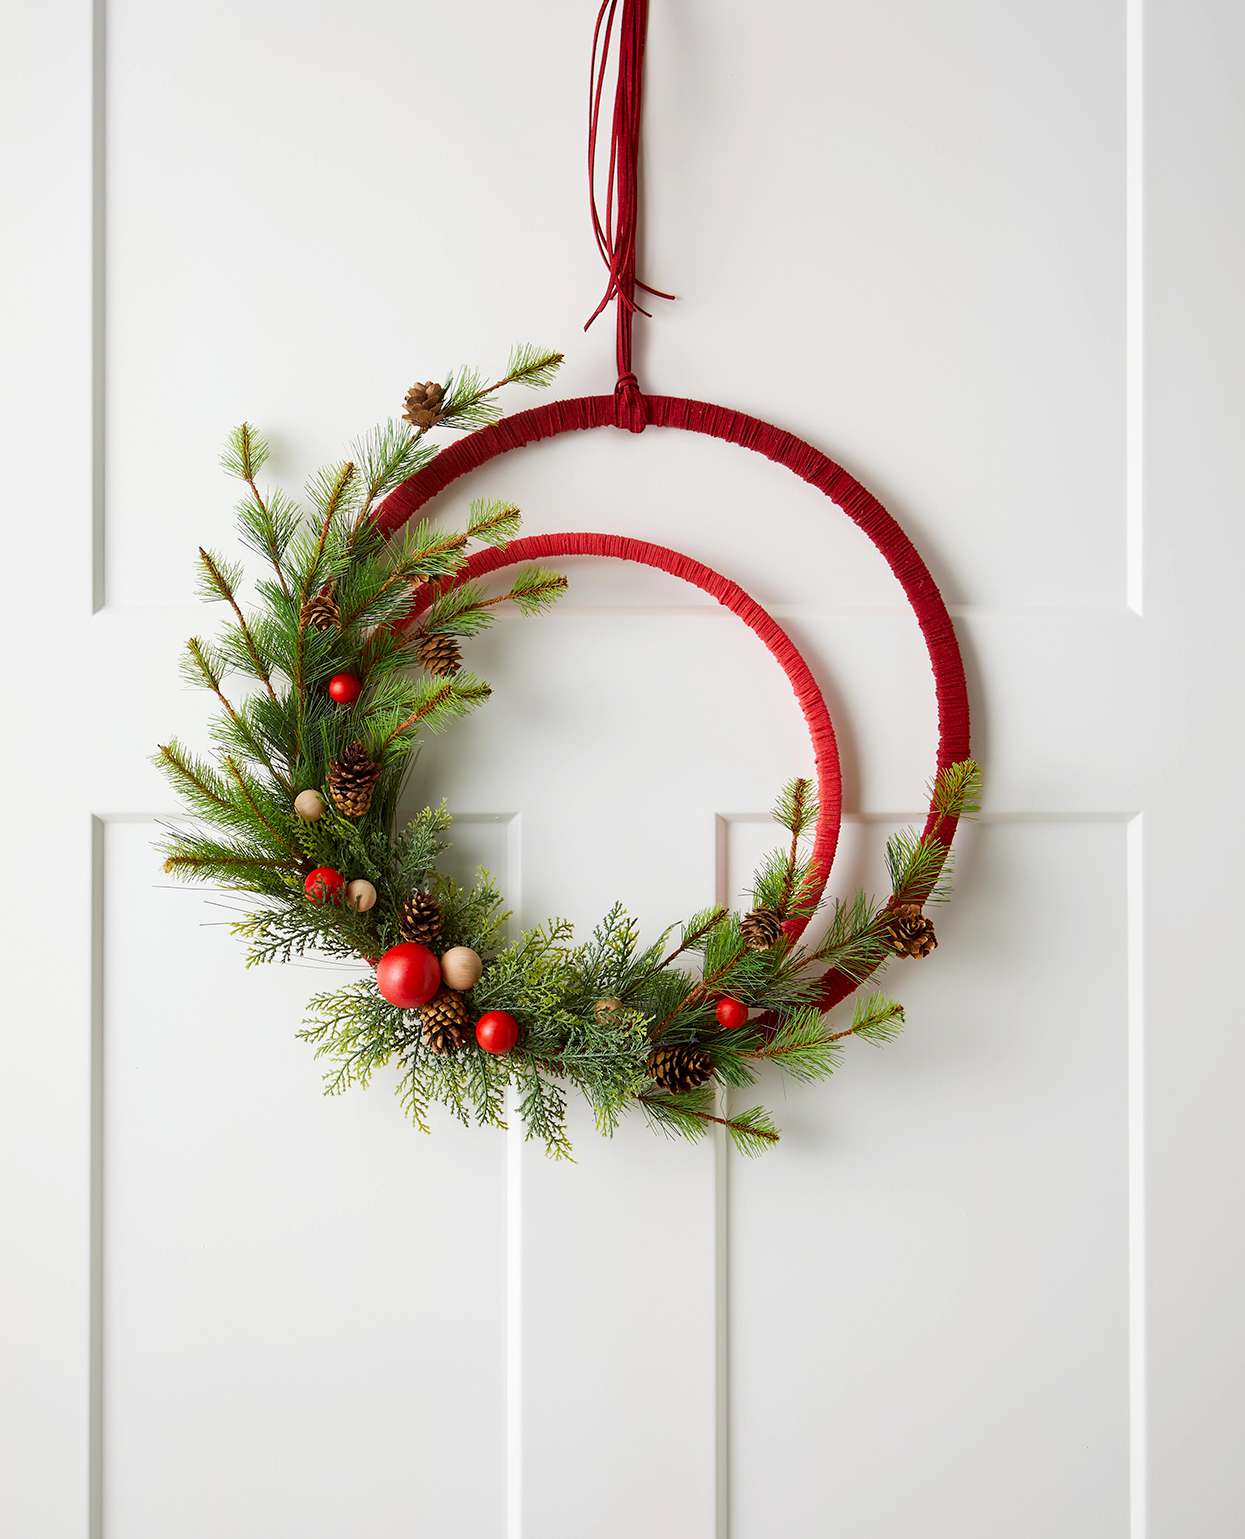 Uonlytech Artificial Christmas Swag Christmas Door Wreath Hanging Garland with Ball Ornament for Xmas Holiday Front Door Wall Decor